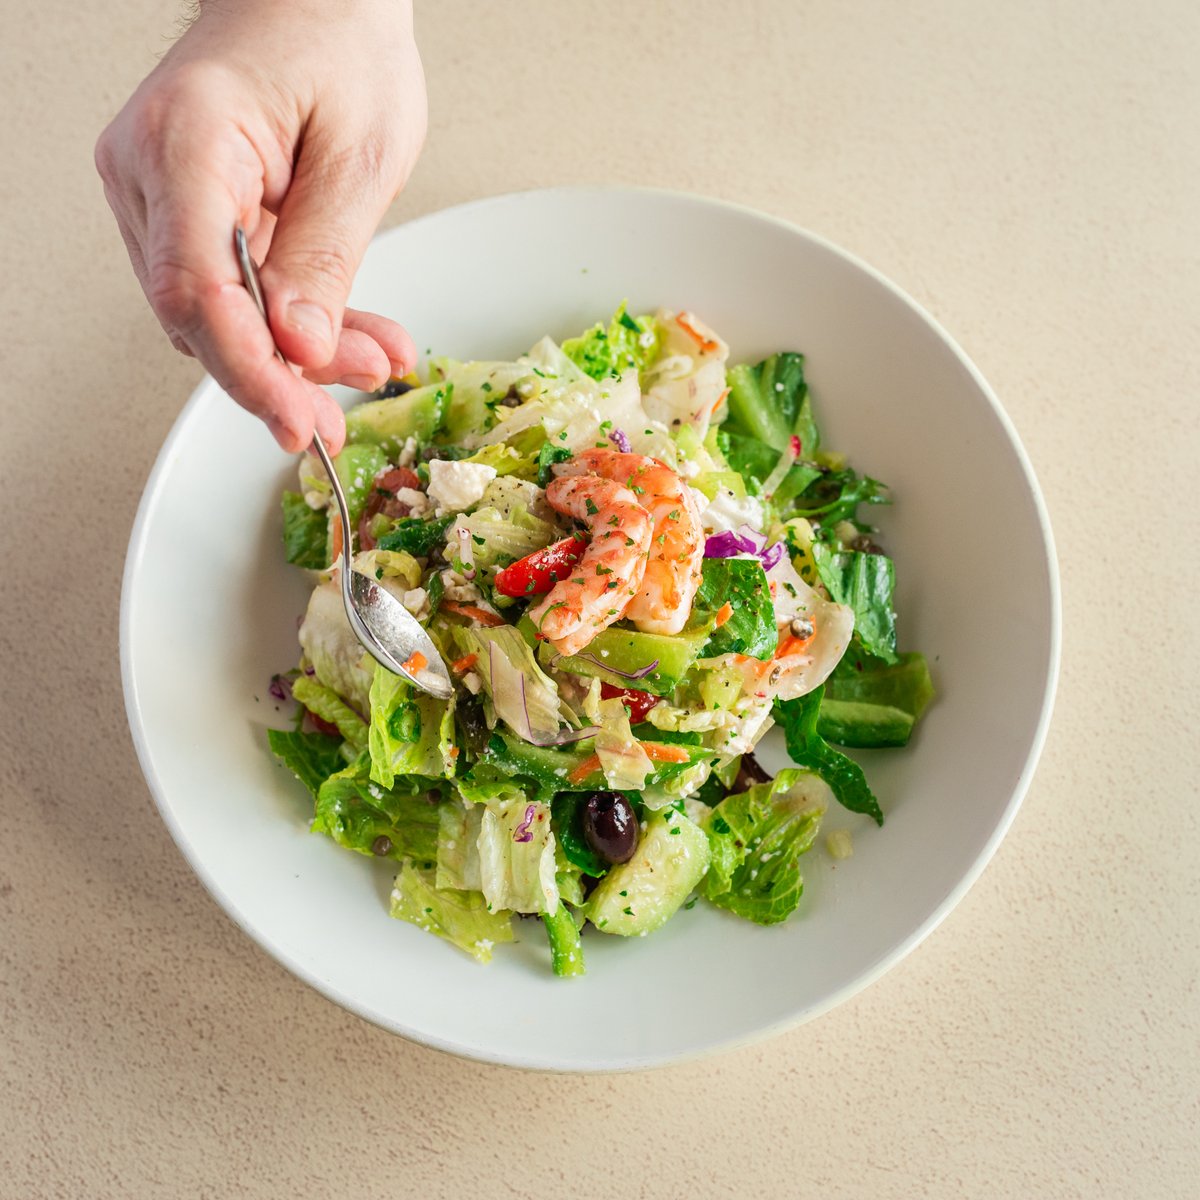 Craving something light and flavorful? Our Greek Salad is the answer! 🍤🥒🍅 Made with succulent shrimp, crisp veggies, savory feta, and drizzled with our signature dressing. #FreshAndTasty #Pappadeaux